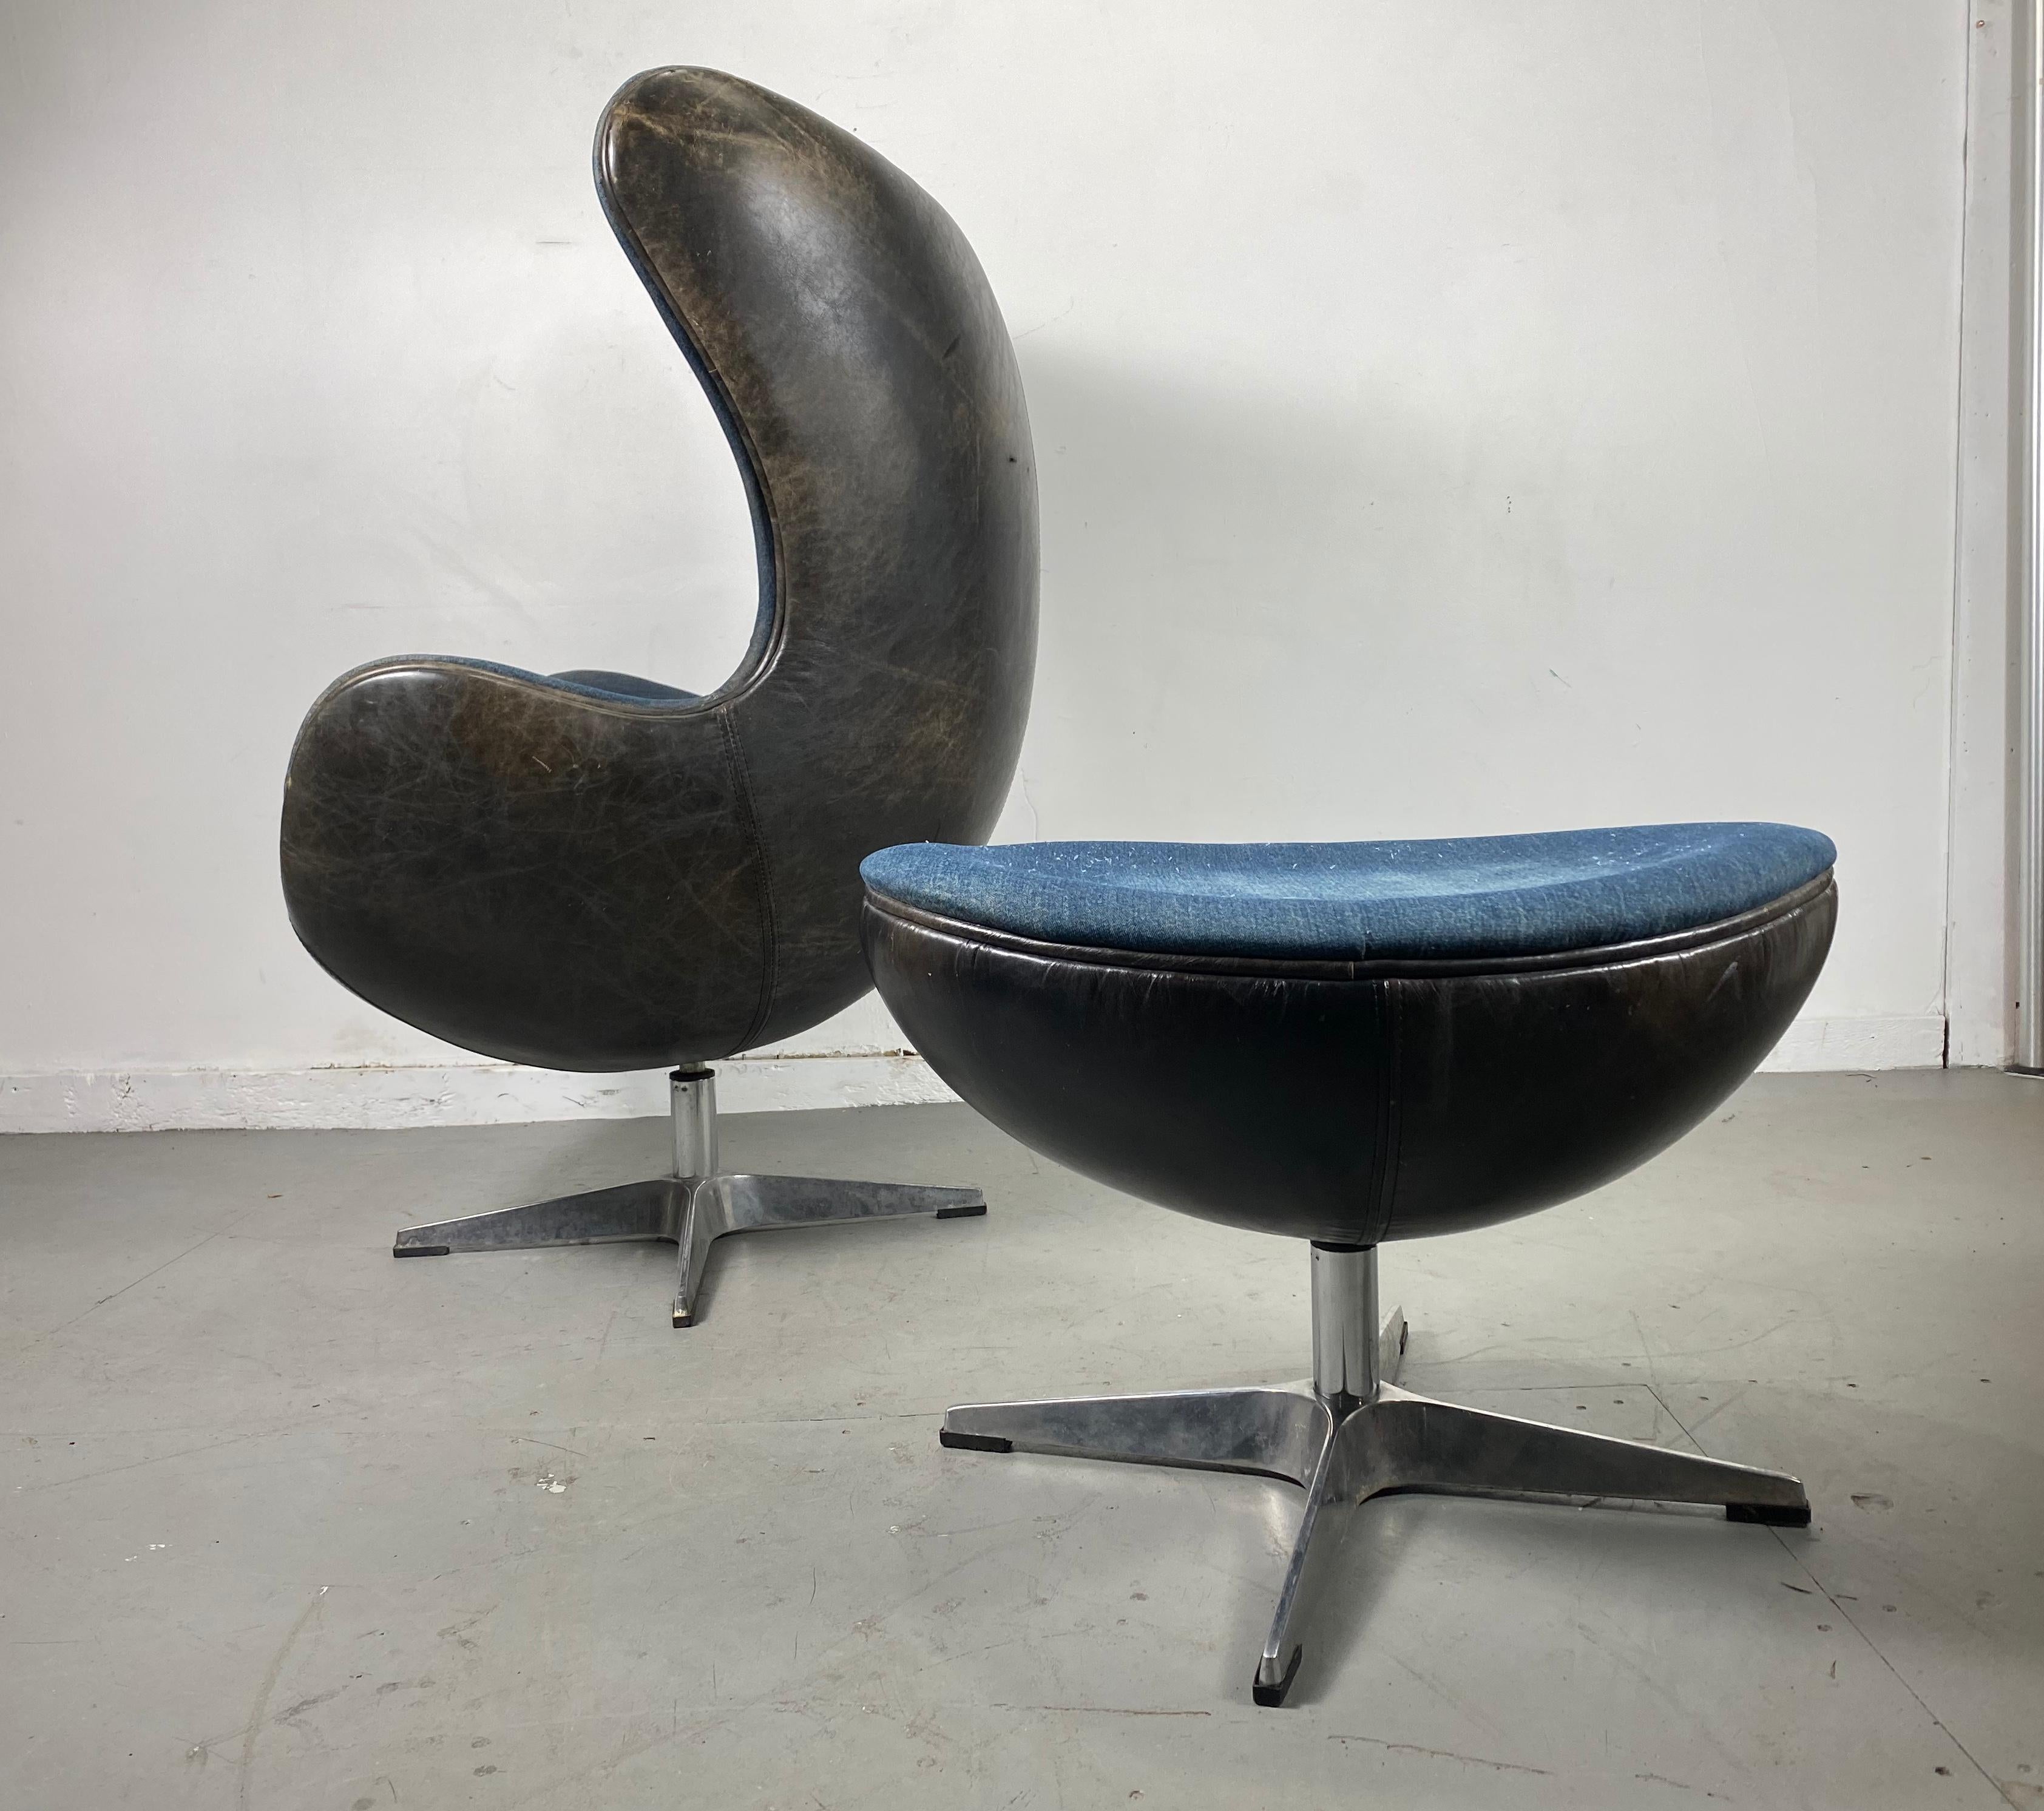 Aluminum Classic Egg Chair and Ottoman, Black Leather and Denim, After Arne Jacobsen